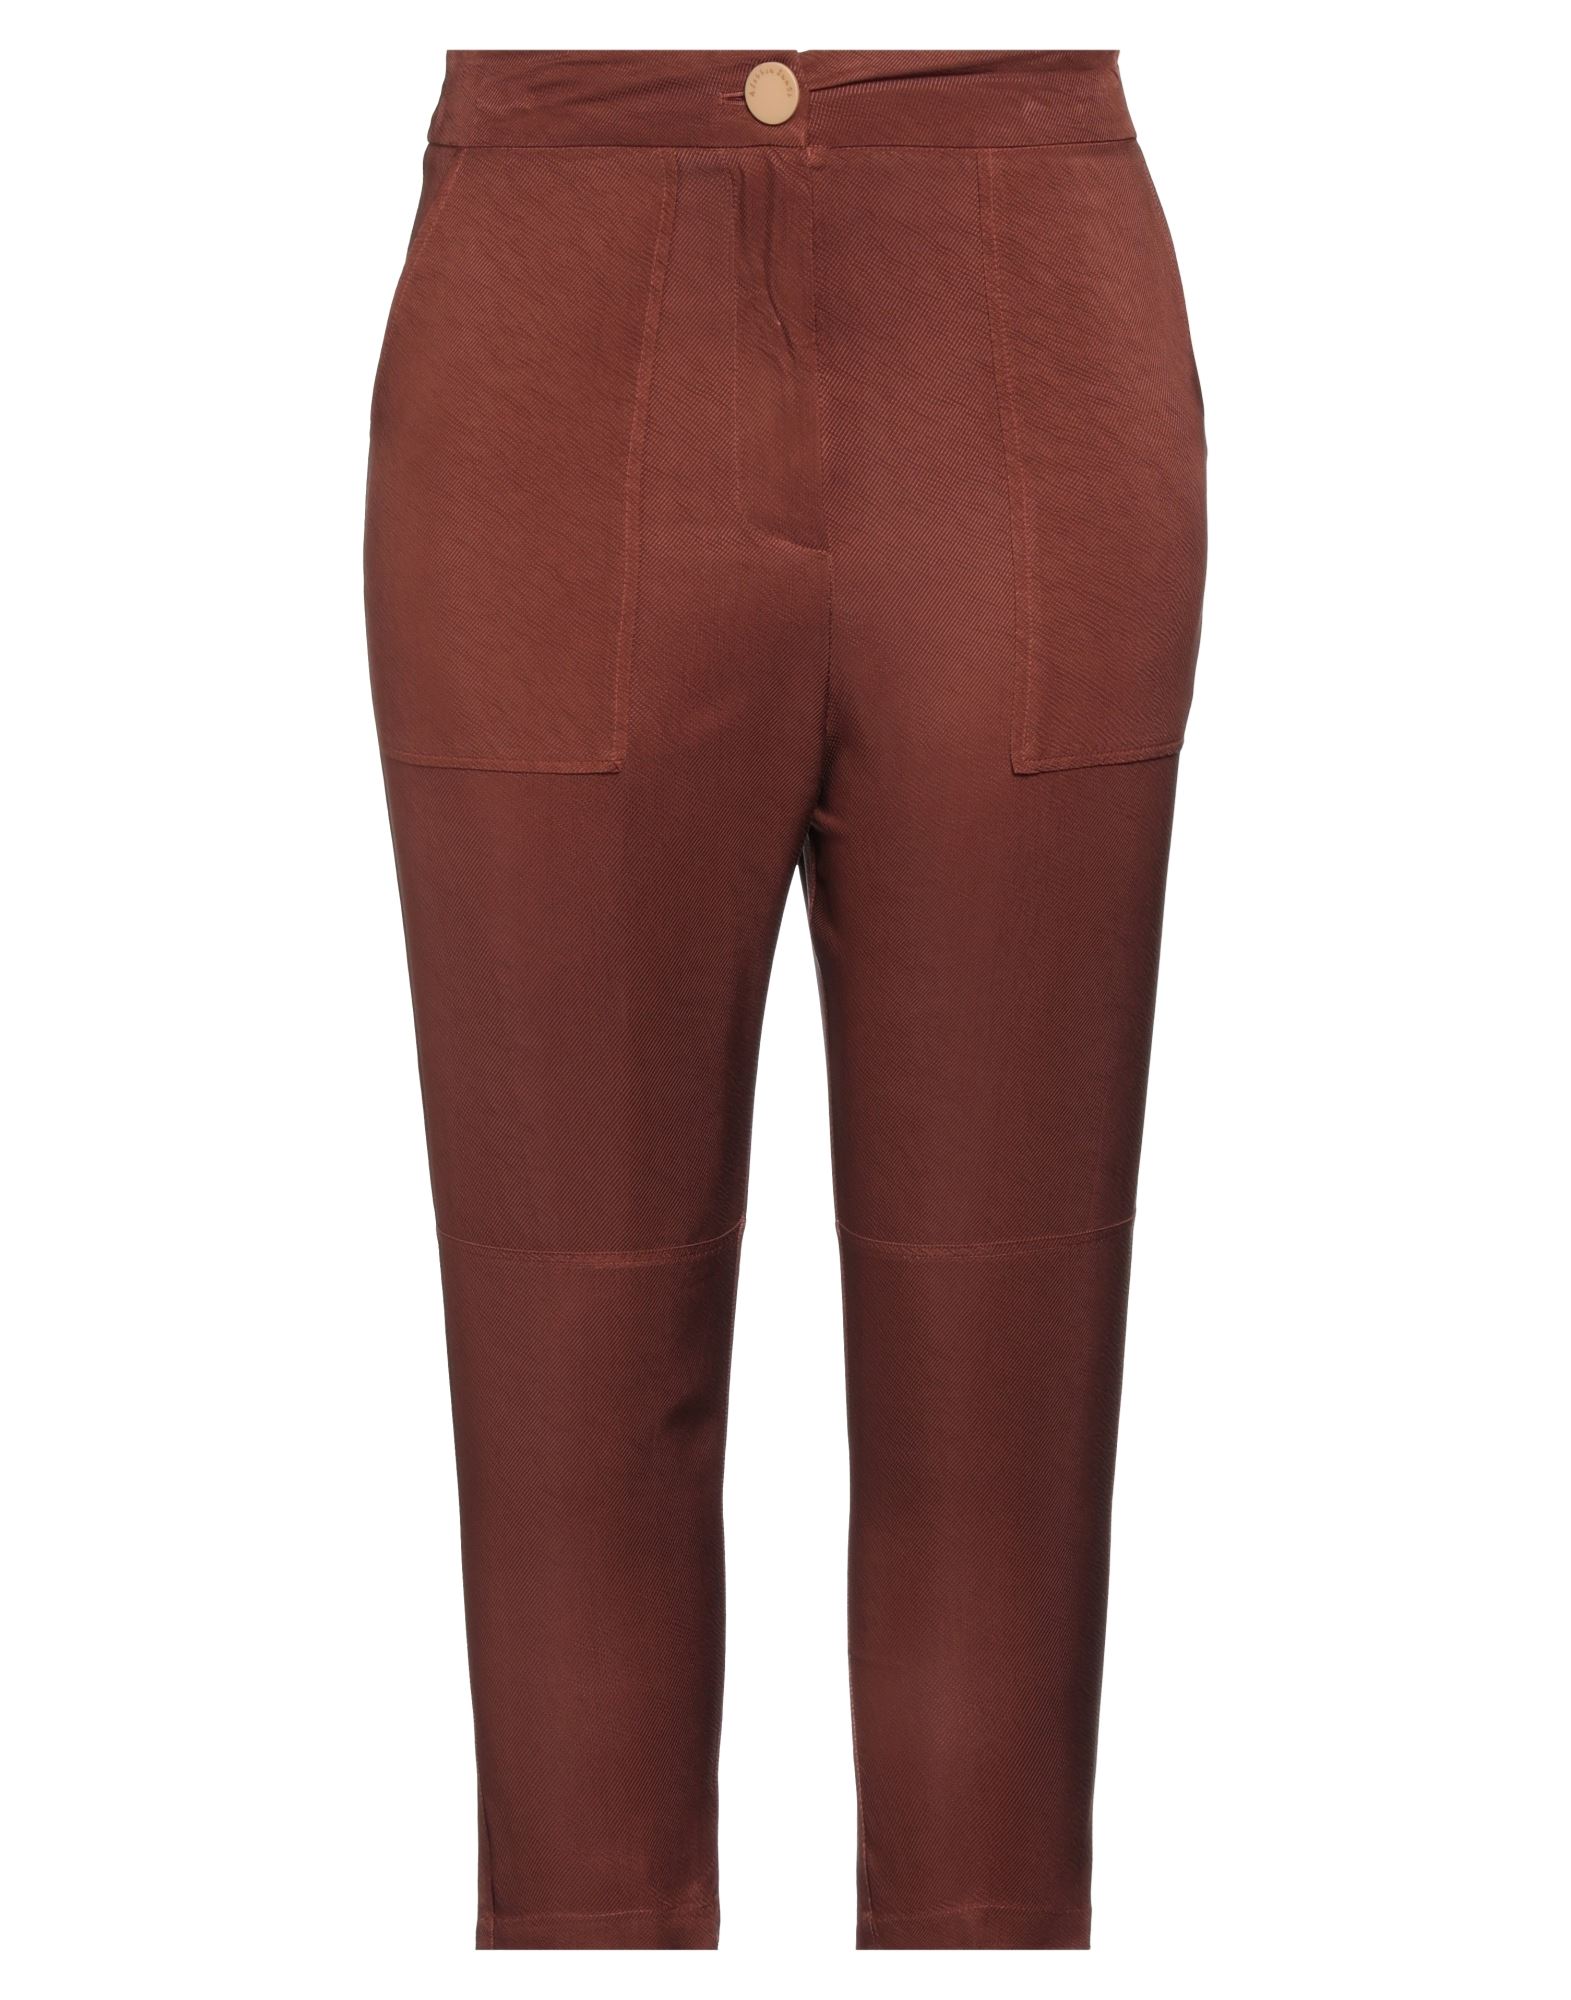 Alessia Santi Cropped Pants In Brown